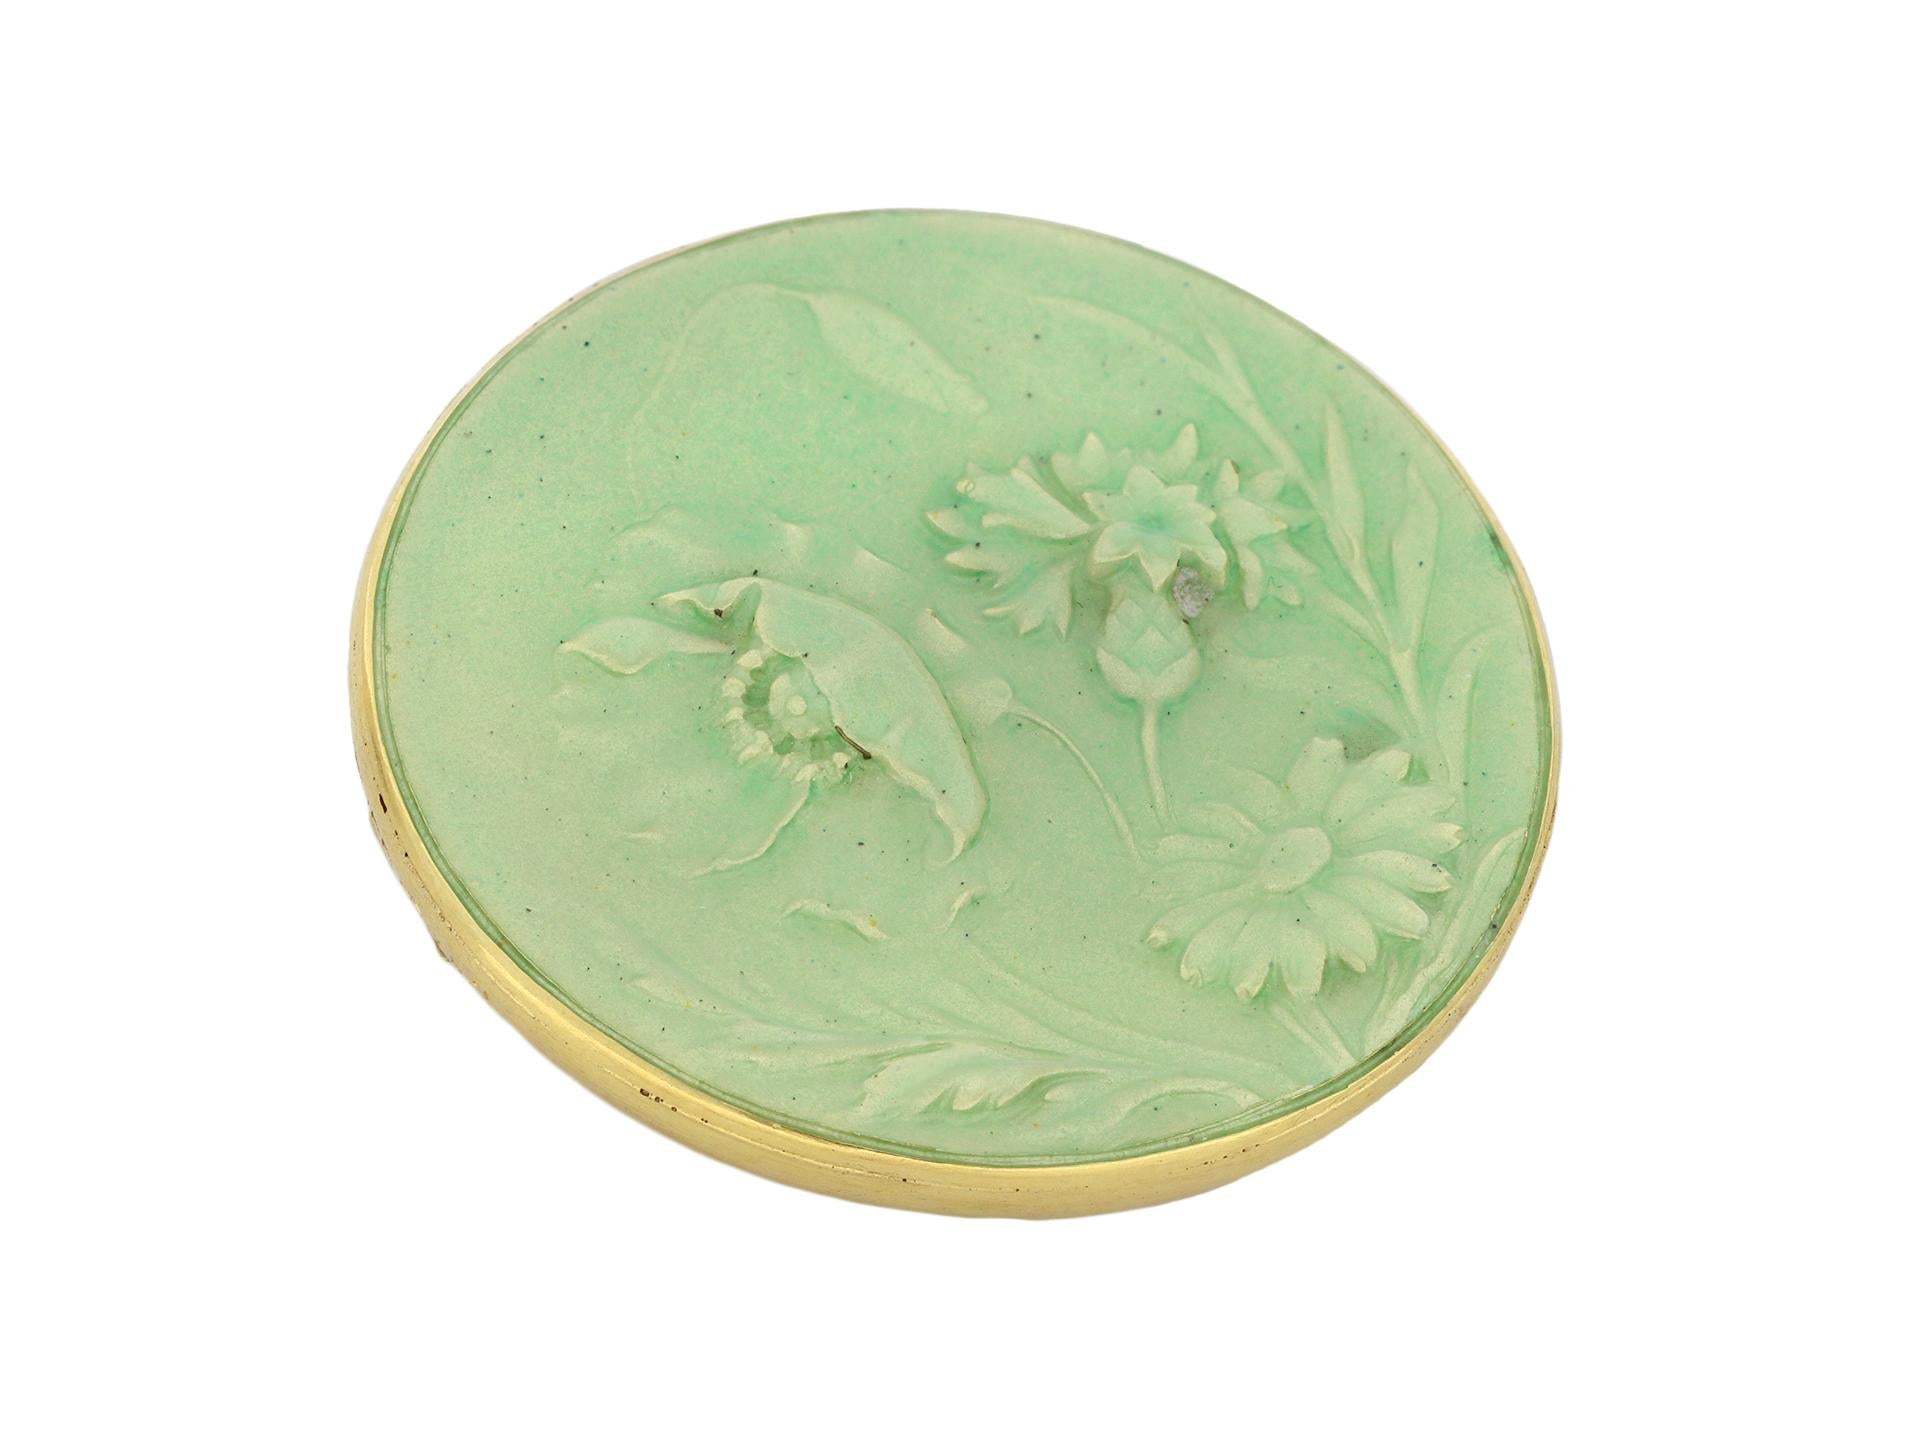 Enamel and gold brooch by Maison Vever Paris, French, circa 1900. An 18 carat yellow gold brooch in the form of a circular shallow concave disk decorated with a poppy, a daisy and a cornflower surrounded by foliage all in pale green enamel, the